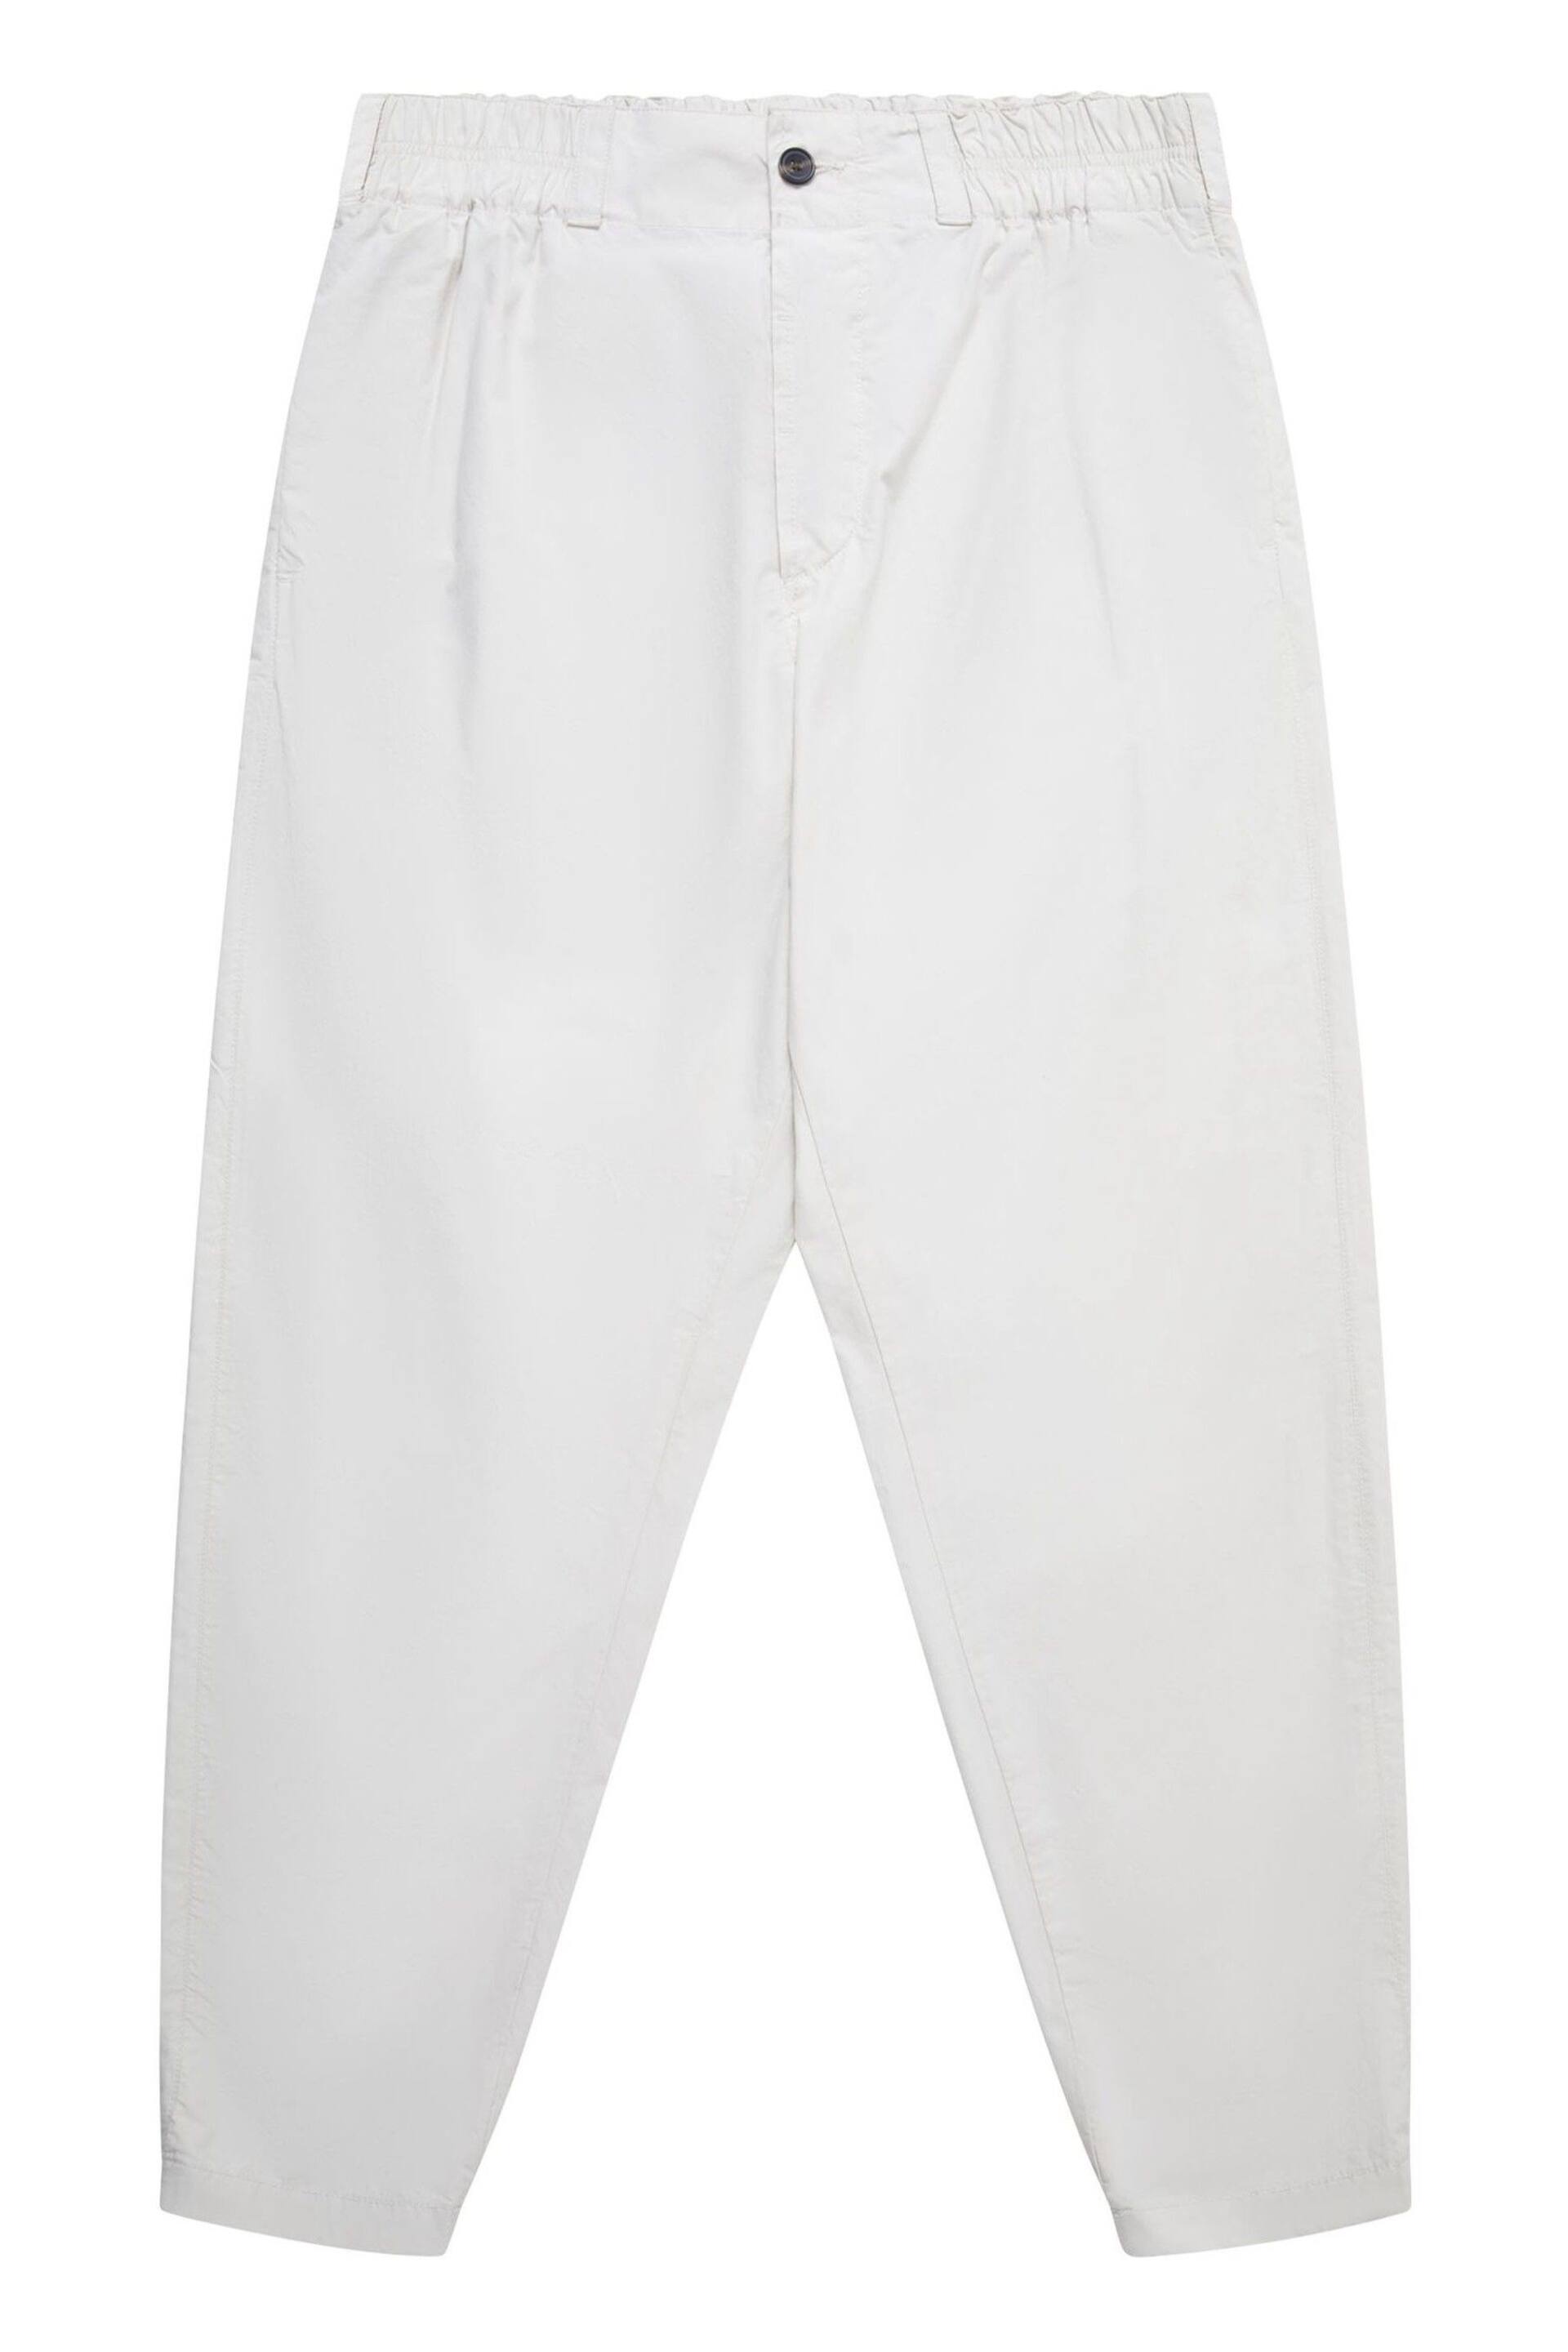 French Connection Military Cotton Tappered Chino Trousers - Image 4 of 4